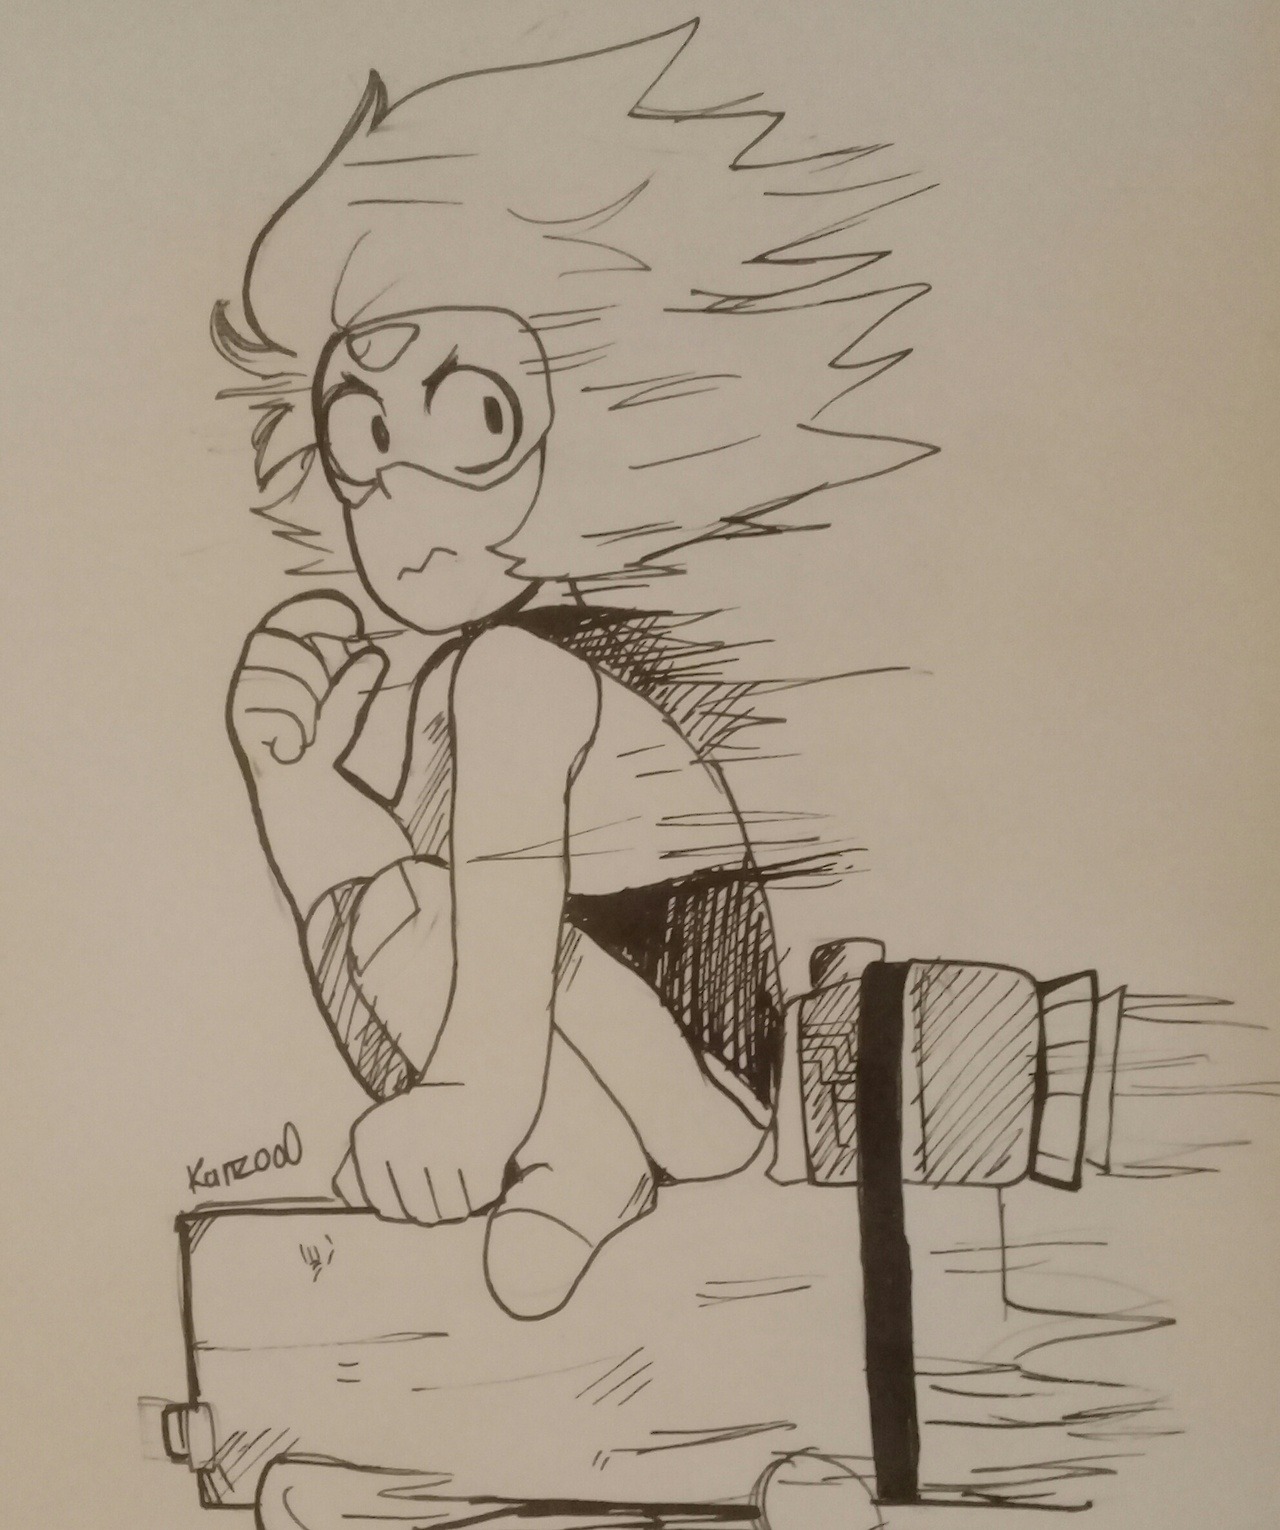 Inktober day 1, gonna *try to* draw peridot for the rest of the month